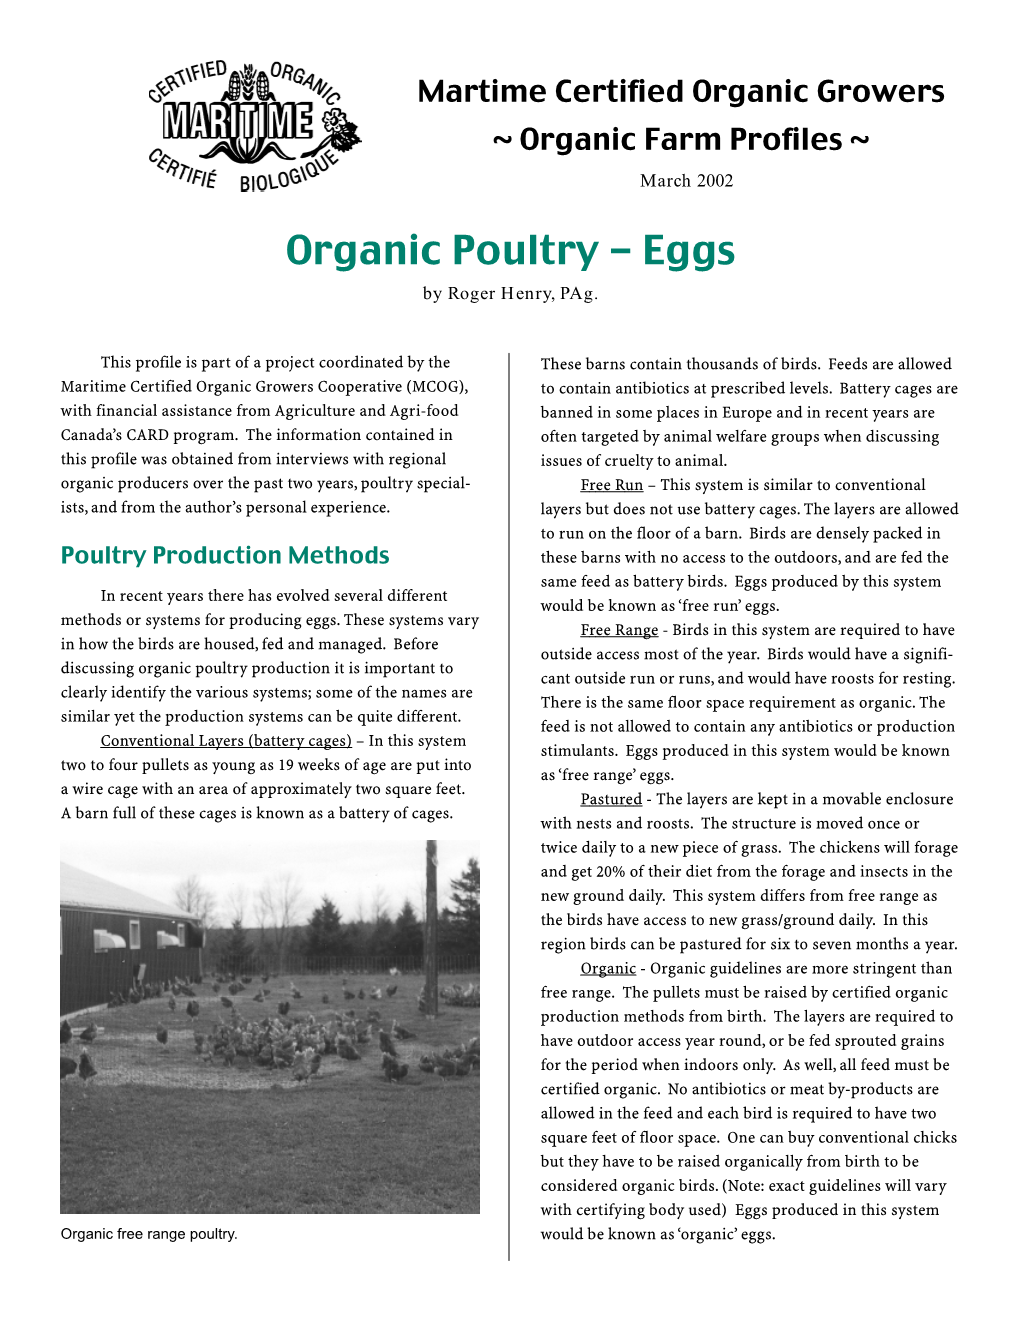 Organic Poultry - Eggs by Roger Henry, Pag